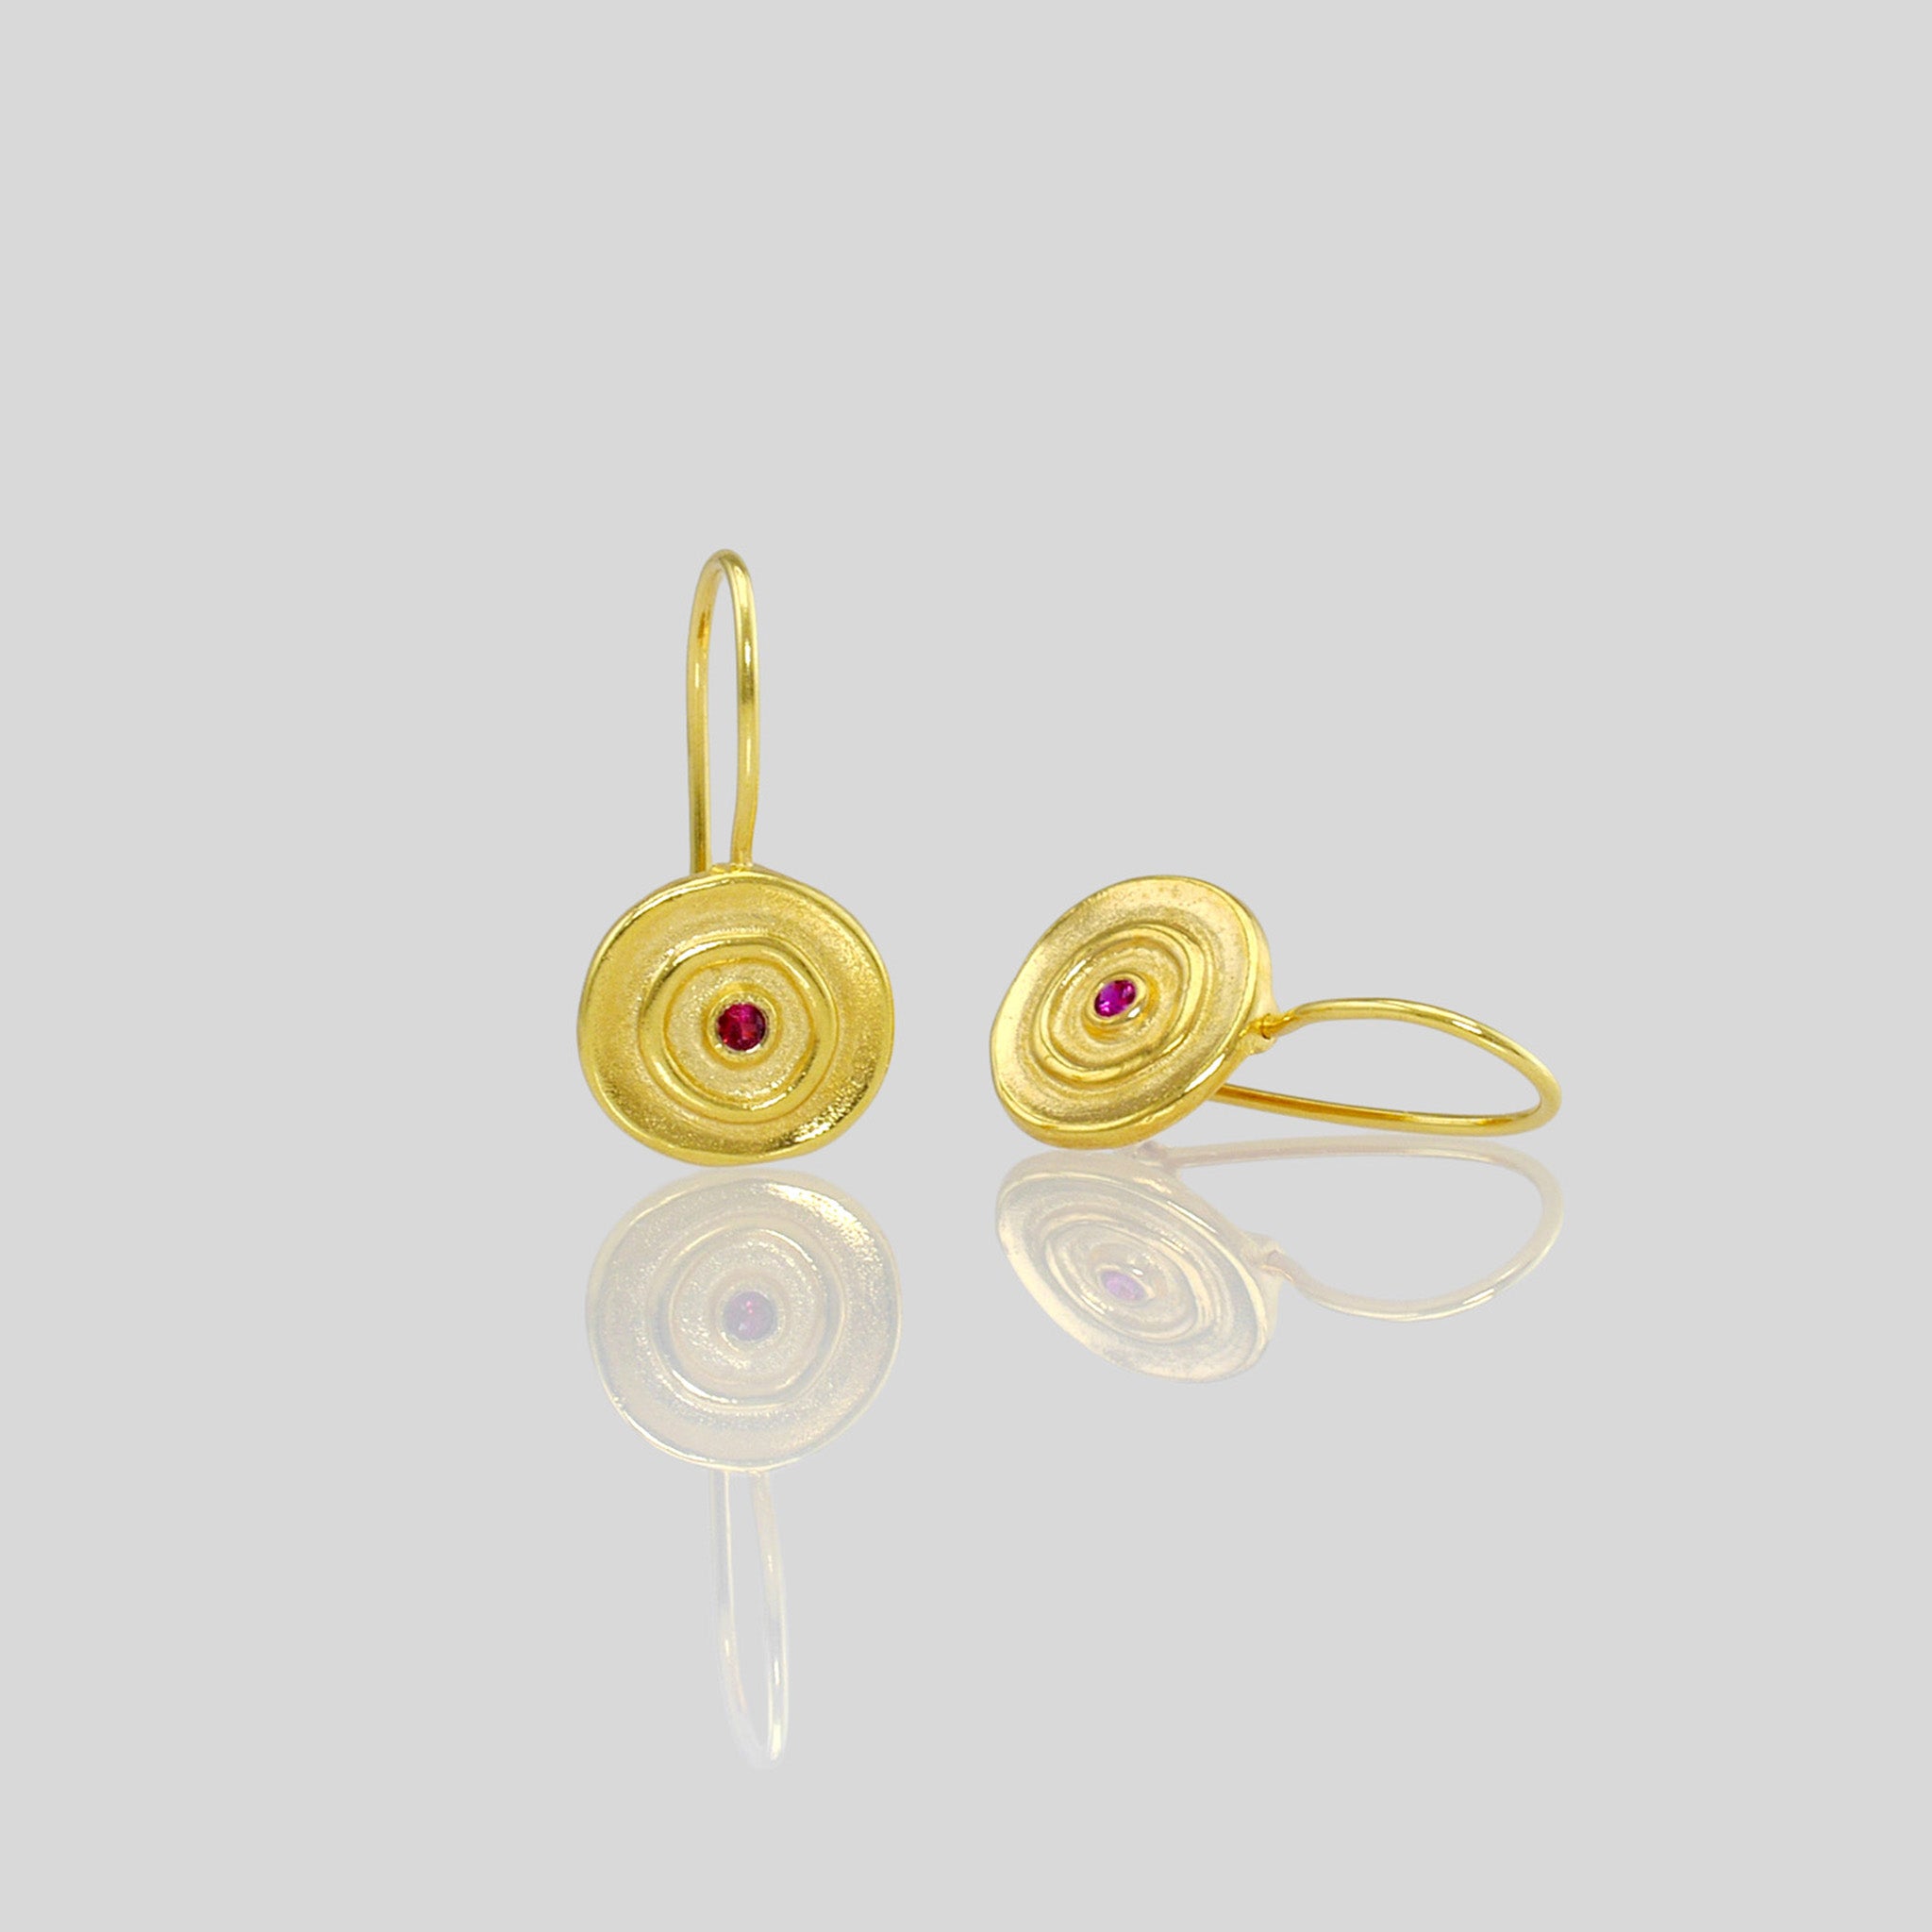 Close up of Hand-made round drop earrings with yellow gold and a central Ruby gemstone, inspired by ancient Egyptian Pharaohs' gold jewelry.